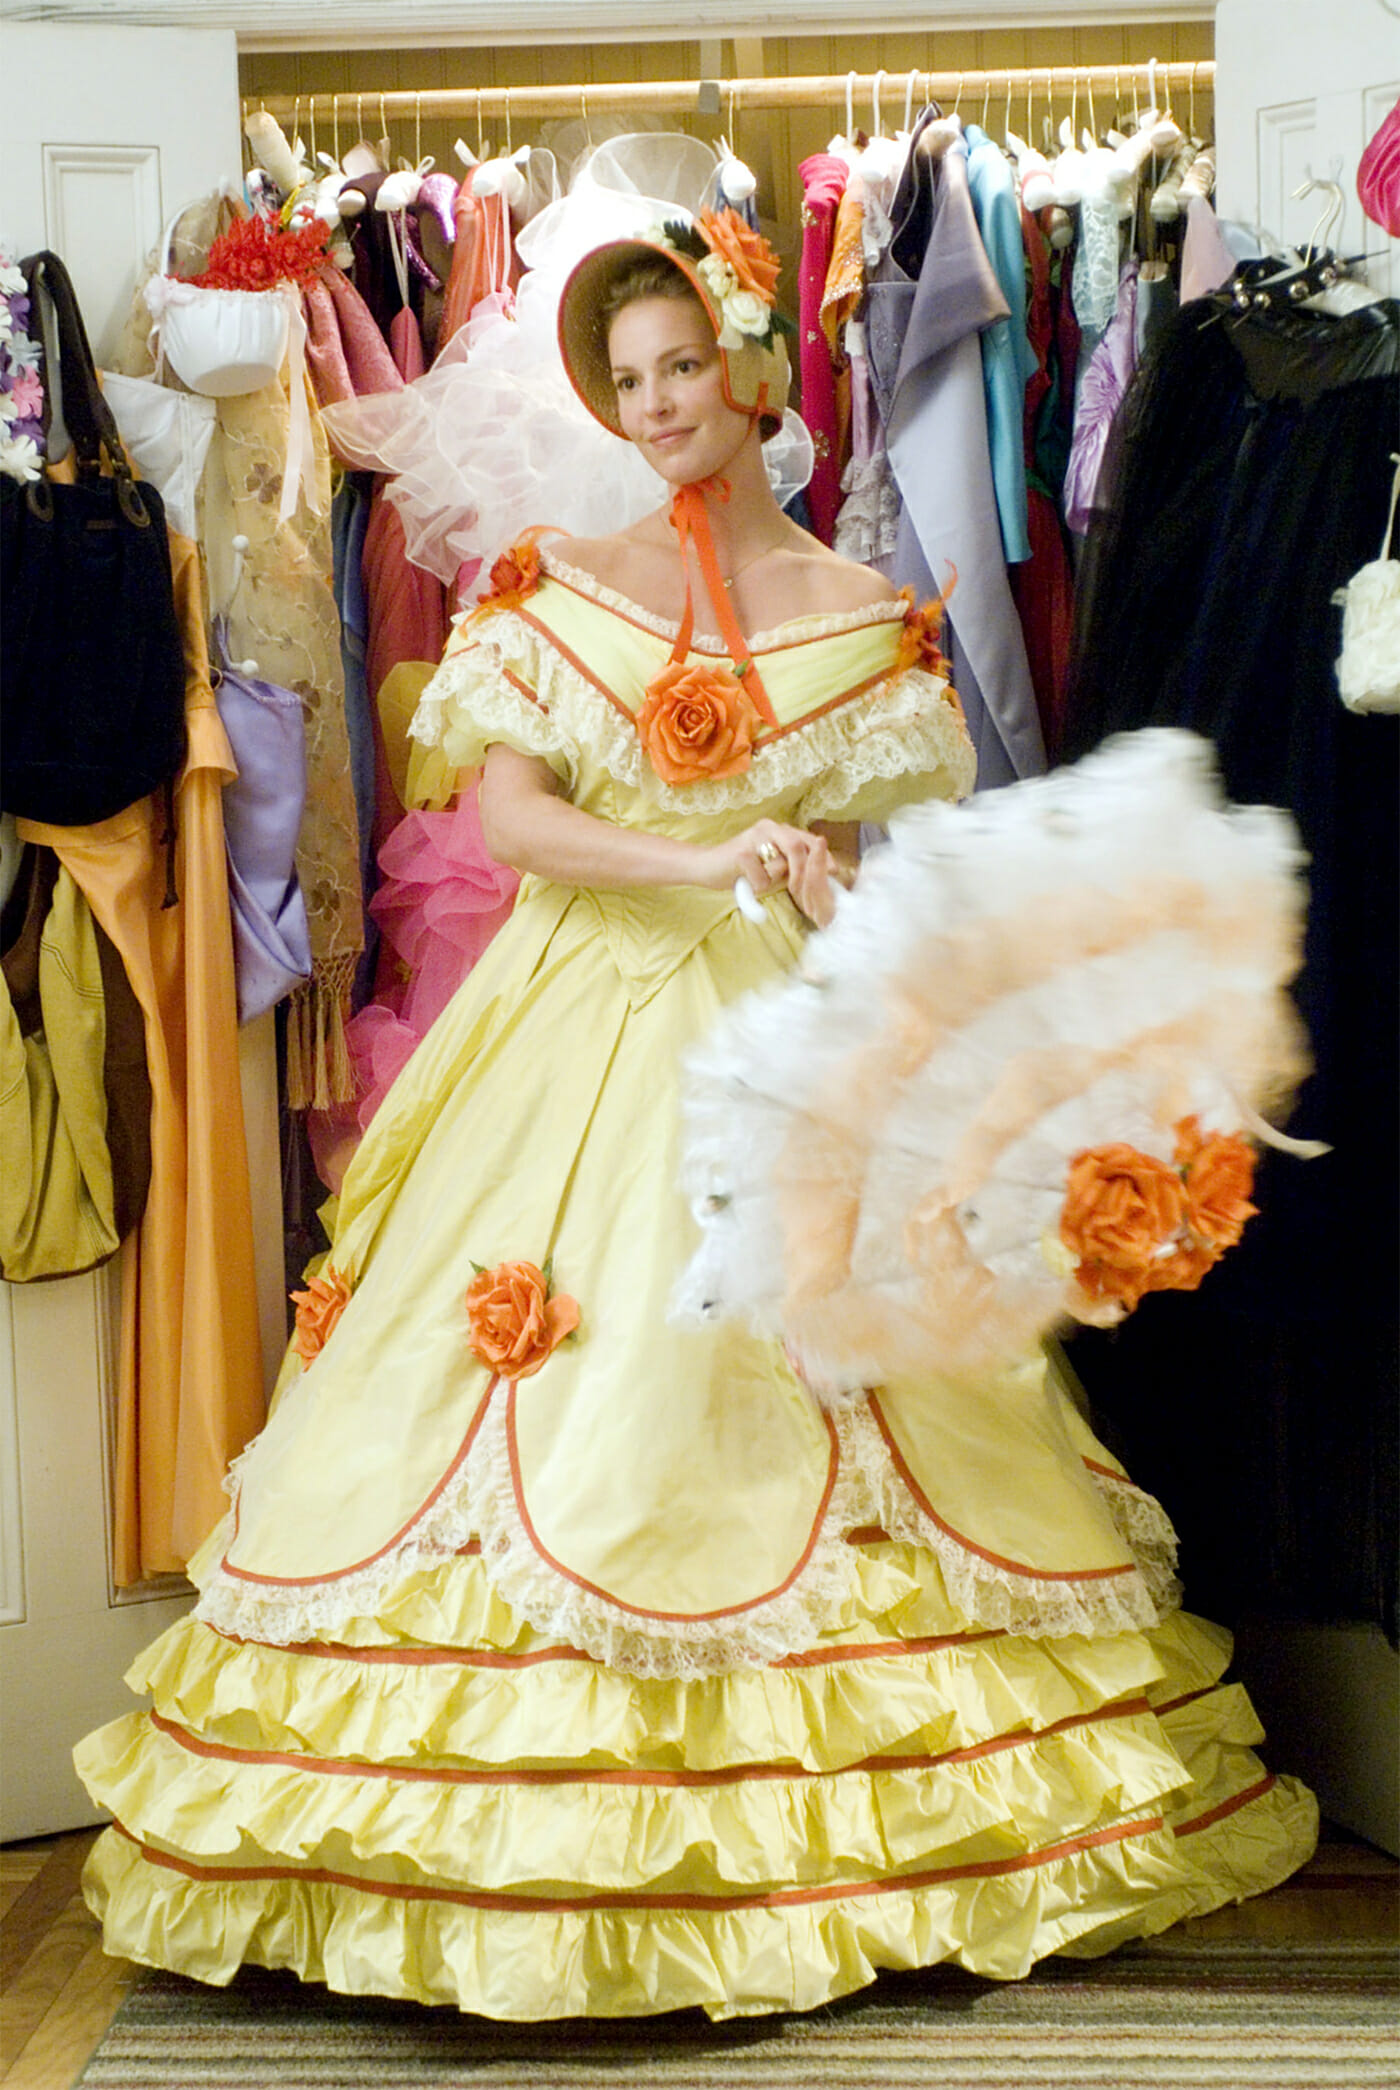 The protagonist of the rom-com poses in a large, frilly, yellow dress for the camera.